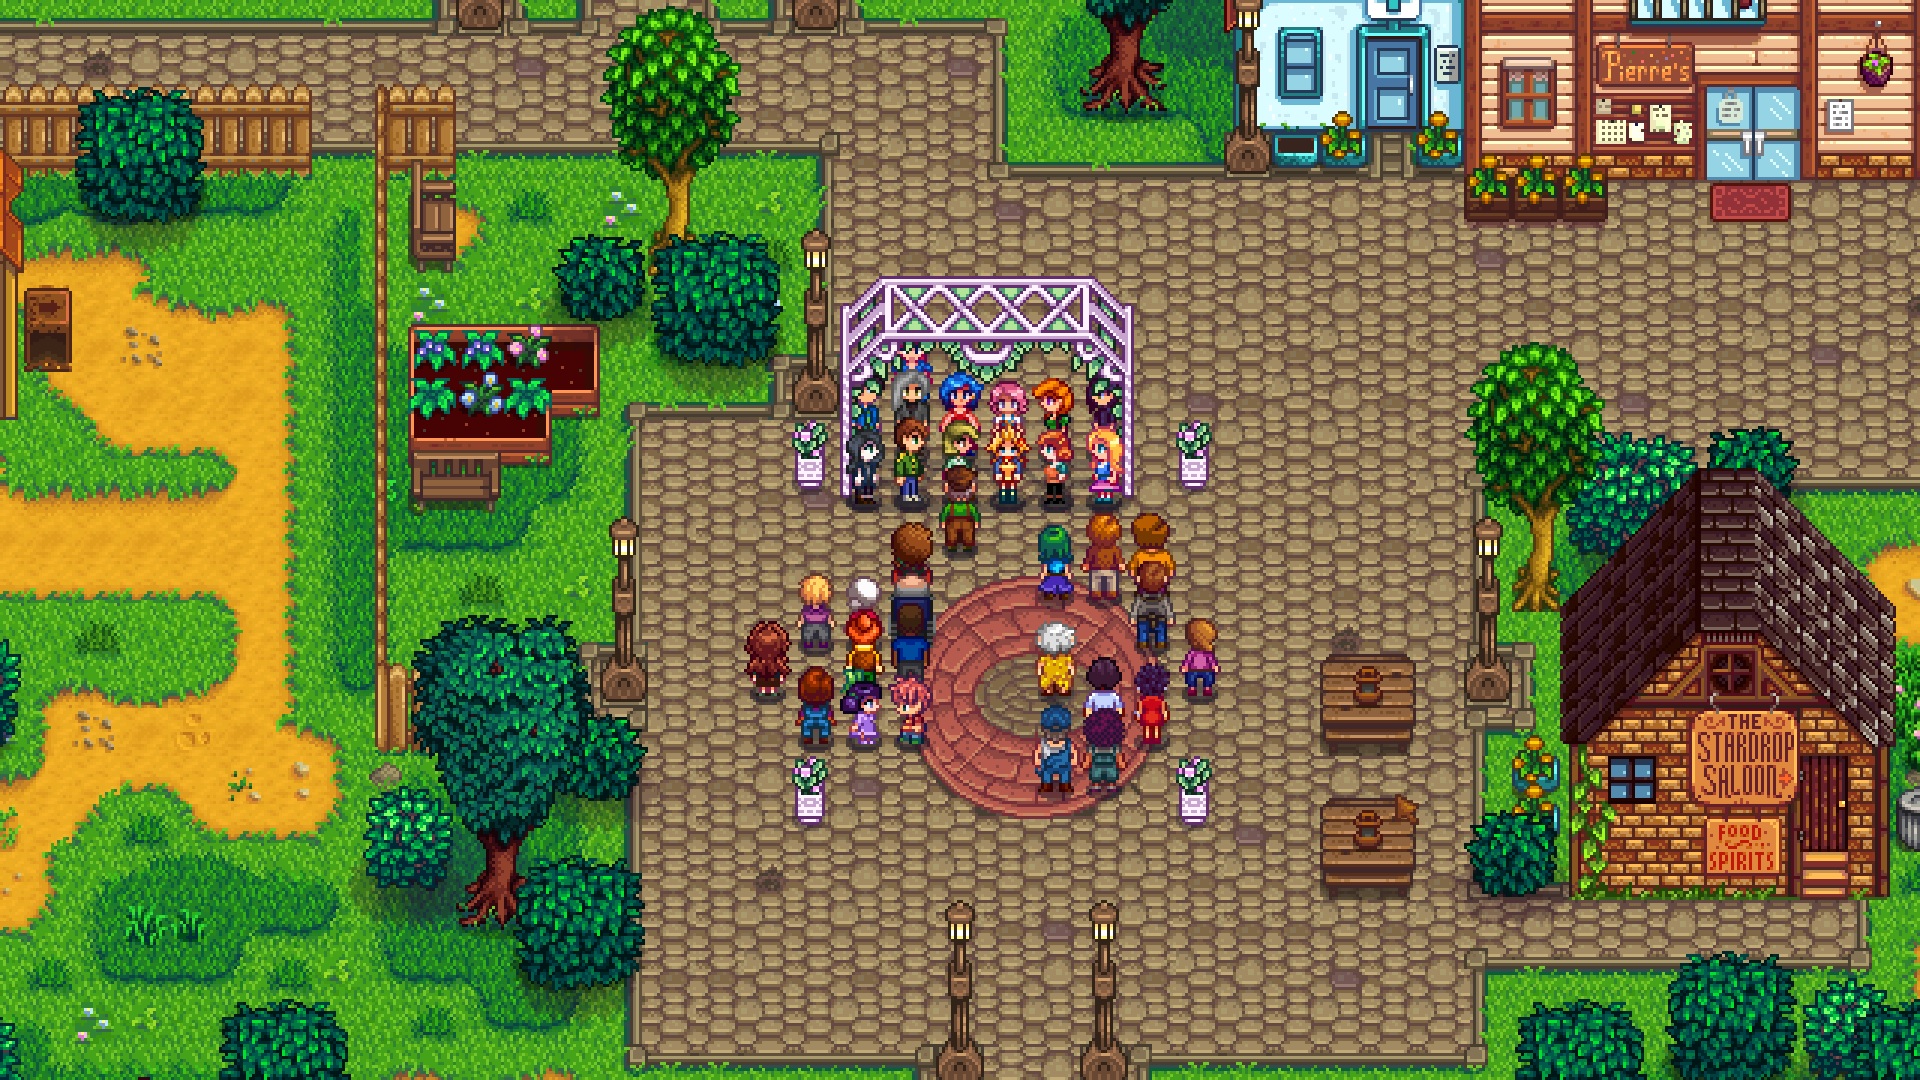 Stardew Valley multiple partners mod - A farmer gets married while all their other spouses stand nearby